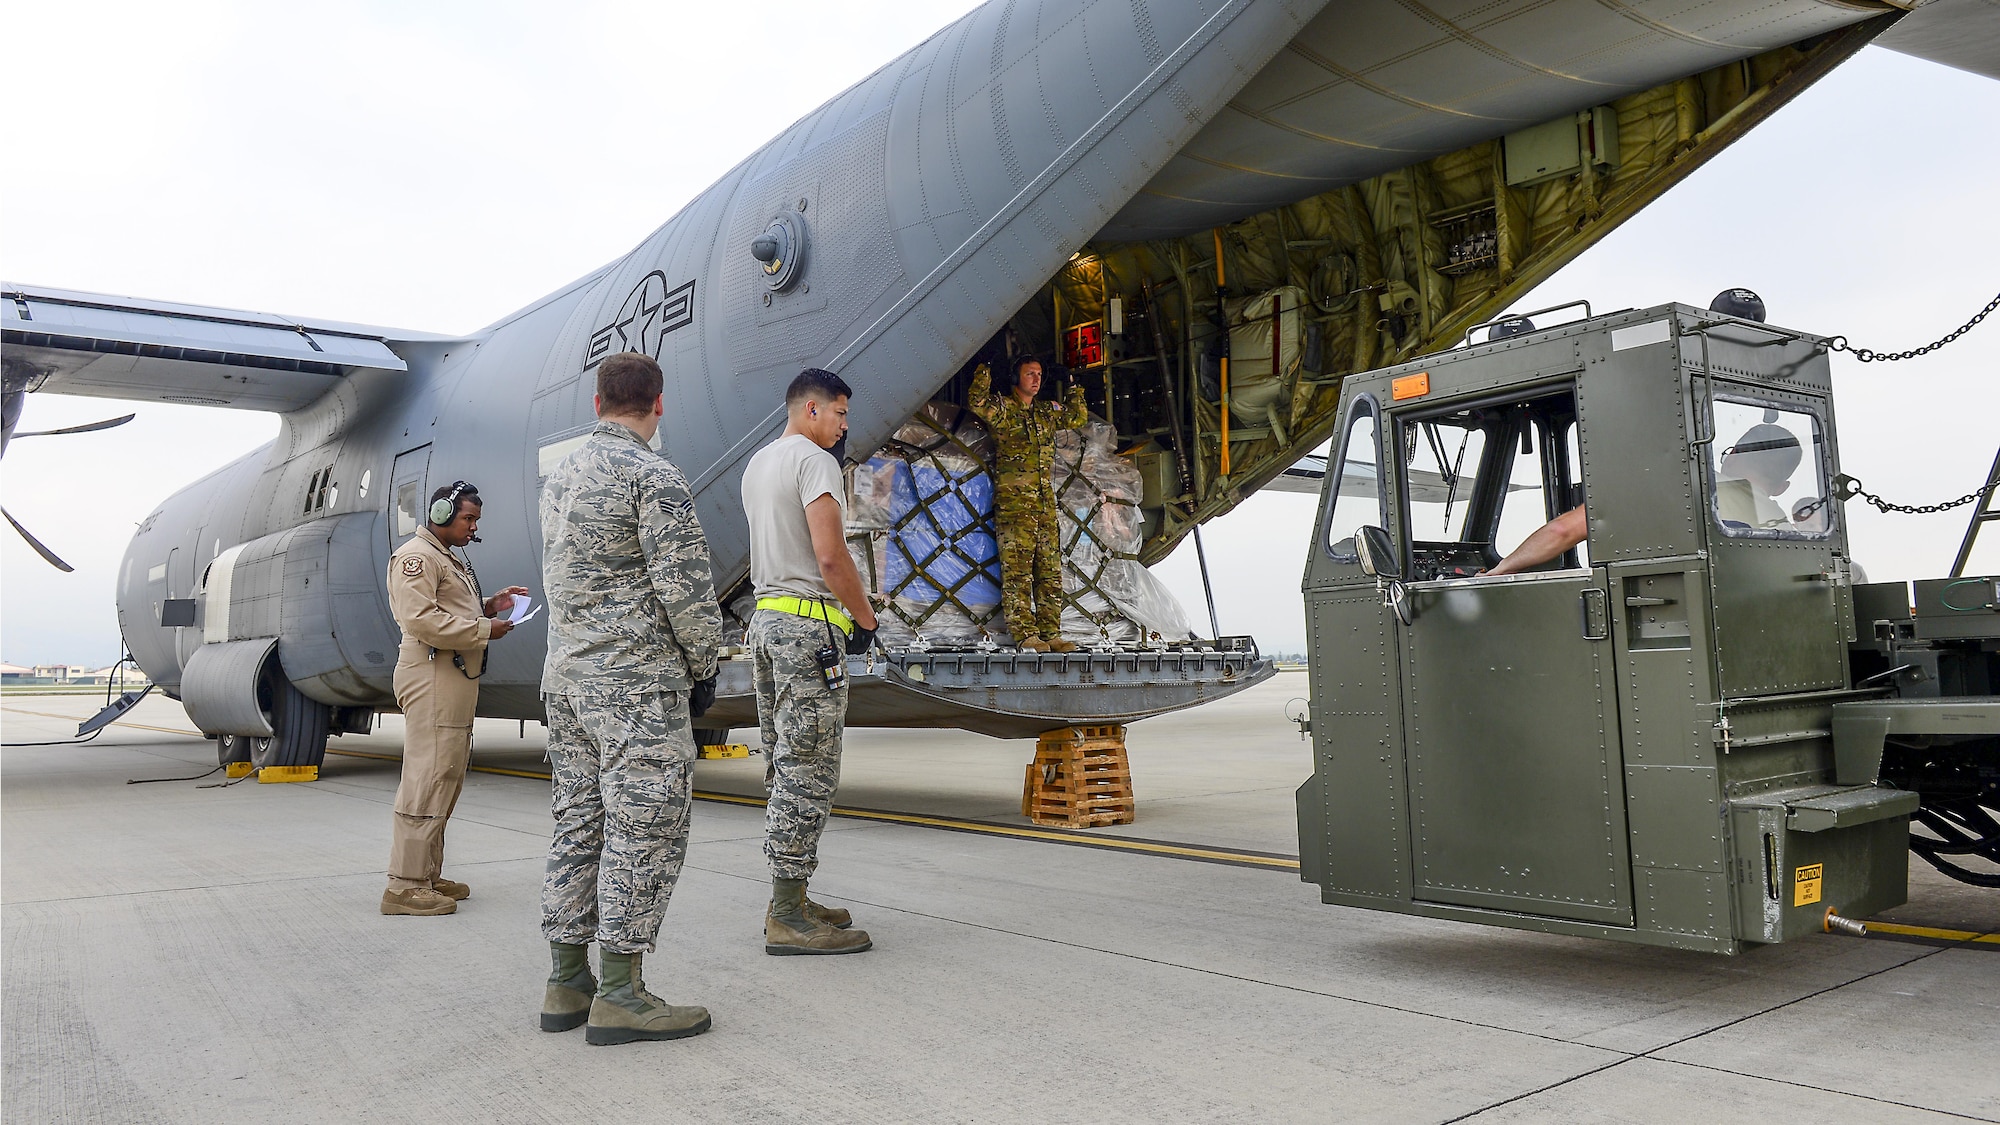 Airmen from the 724th Air Mobility Squadron unload cargo from a C-130 Hercules at Aviano Air Base, Italy, April 6, 2017.  The 724th AMS is responsible for facilitating the transportation of approximately 6,500 tons of cargo each year into and out of Aviano AB.  (U.S. Air Force photo by Airman 1st Class Ryan Brooks)